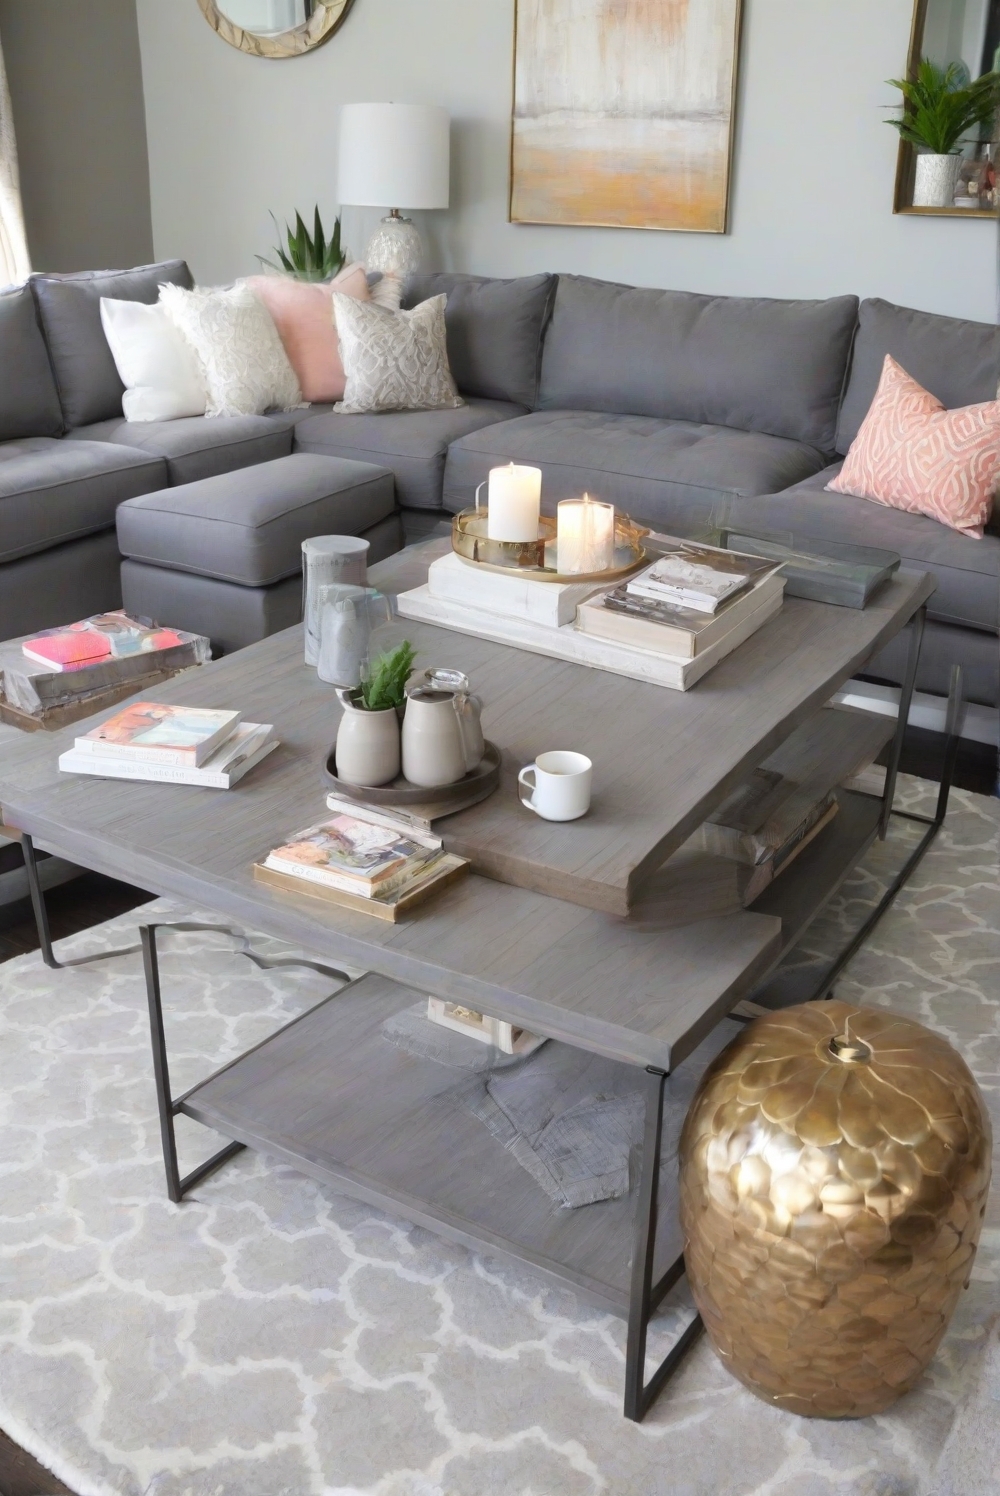 What Coffee Table Color Looks Best with a Gray Couch? - HOME CABINET EXPERT